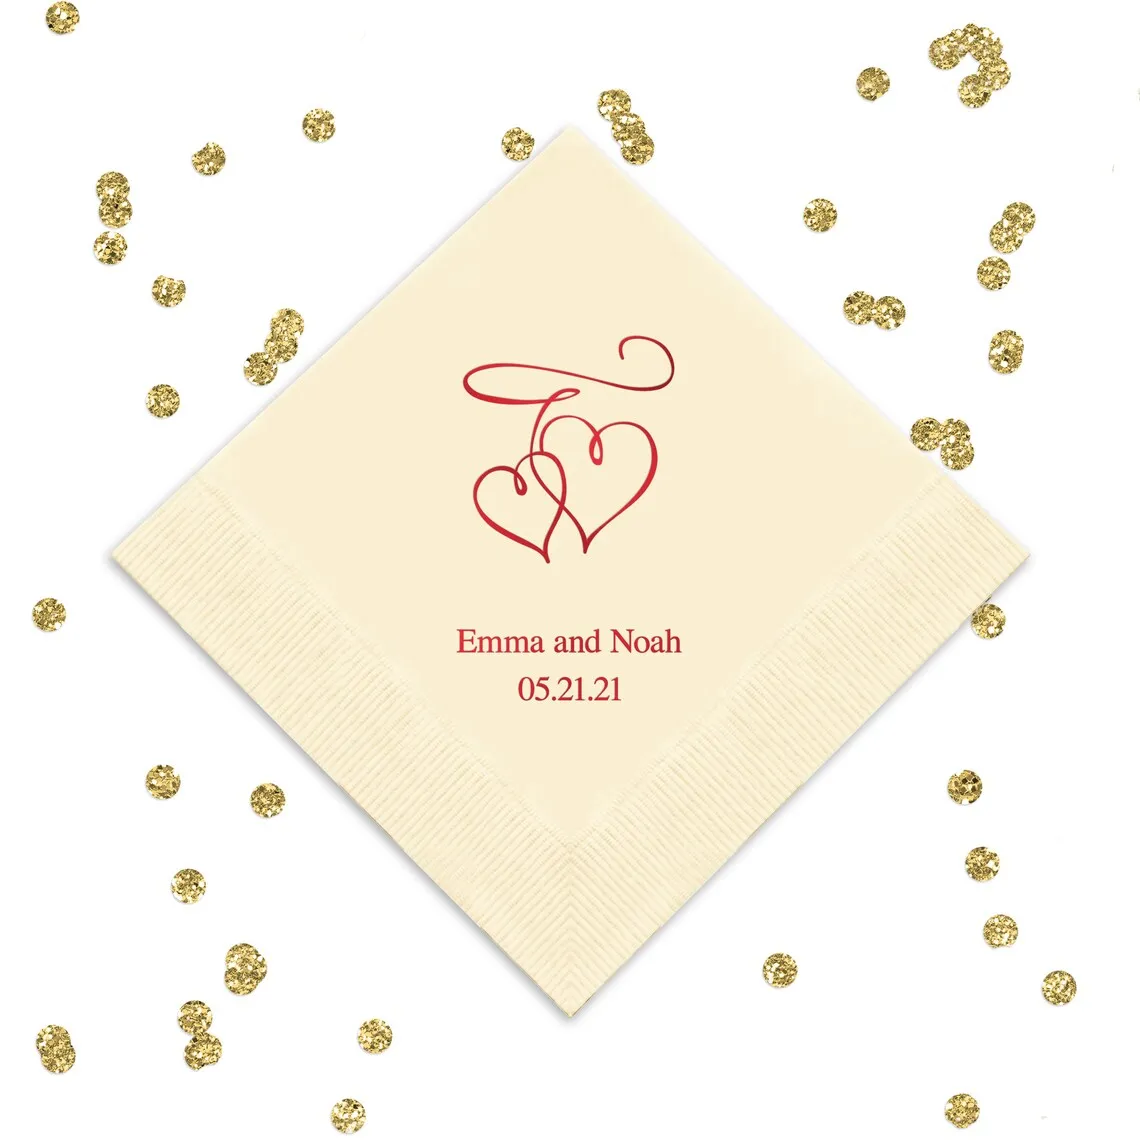 Custom Wedding Napkins - Heart Print Napkins - Anniversary Napkins - Personalized Napkins - Engagement Party - Cocktail - Lunche